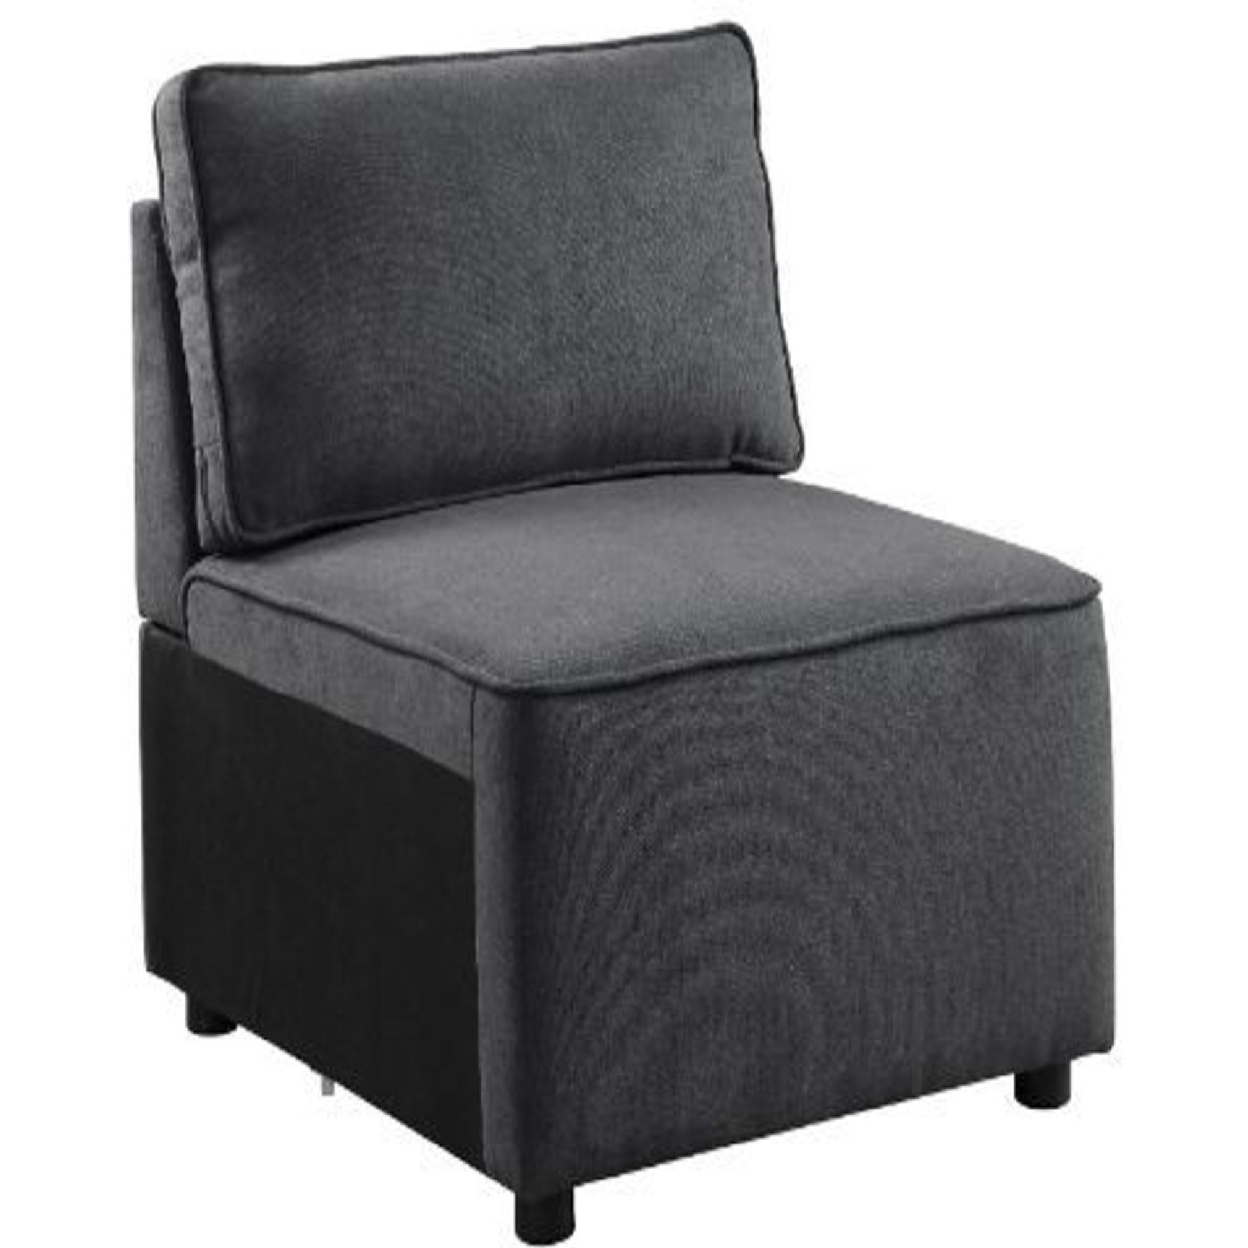 Armless Chair With Pocket Coil Seating And Pillow Back, Gray- Saltoro Sherpi